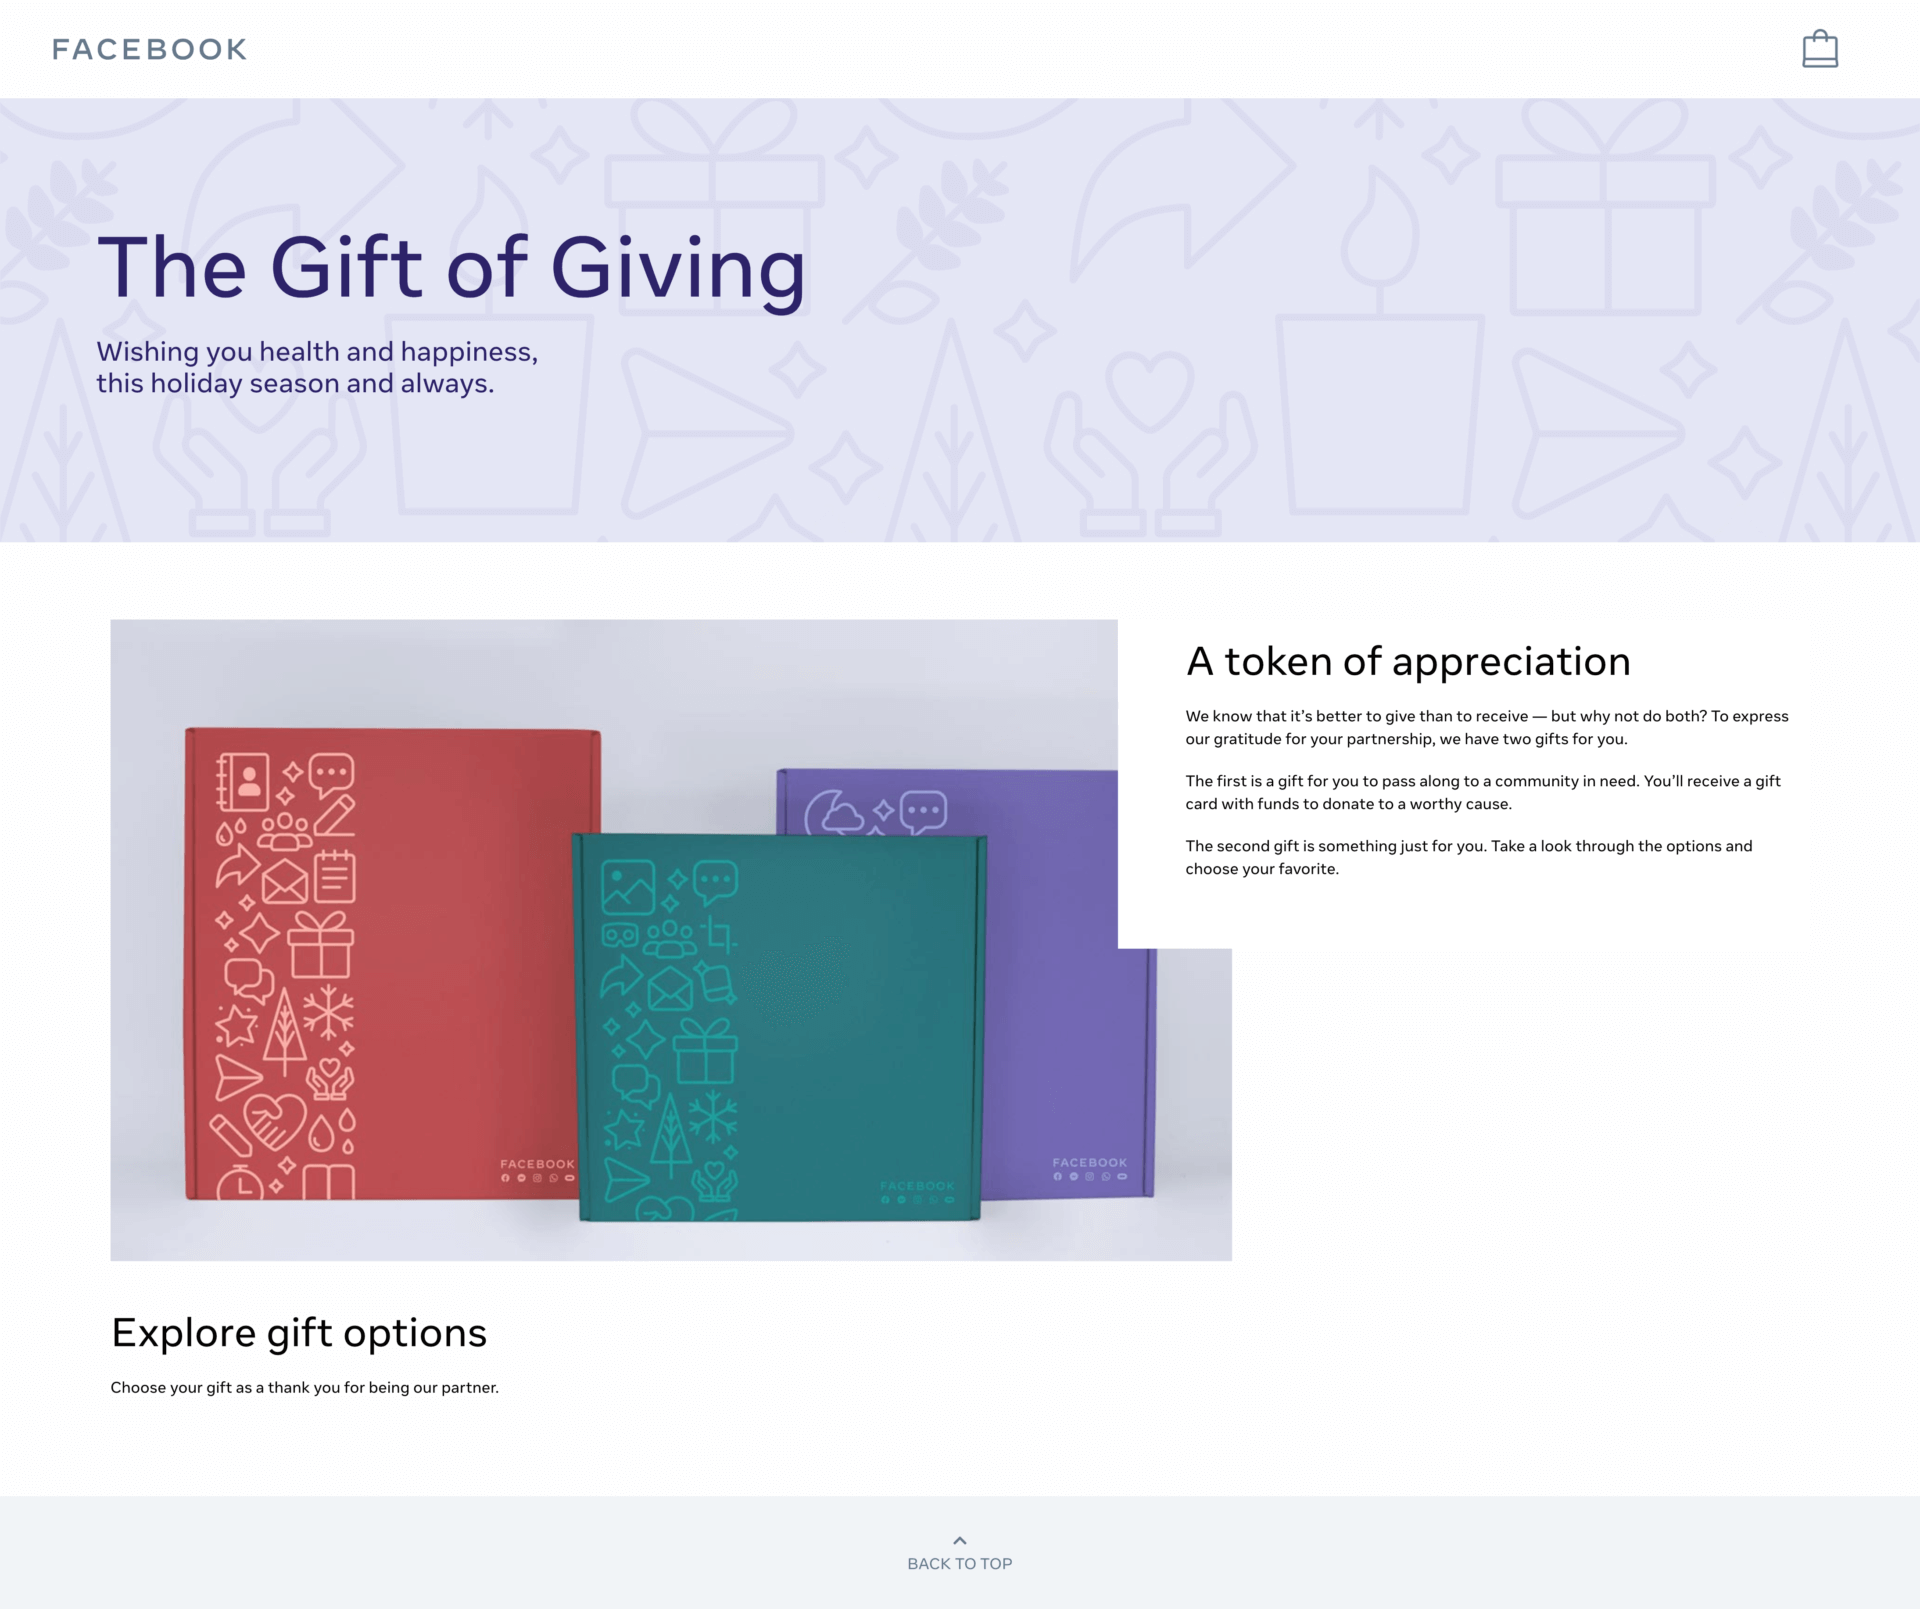 Facebook Gifting Site 